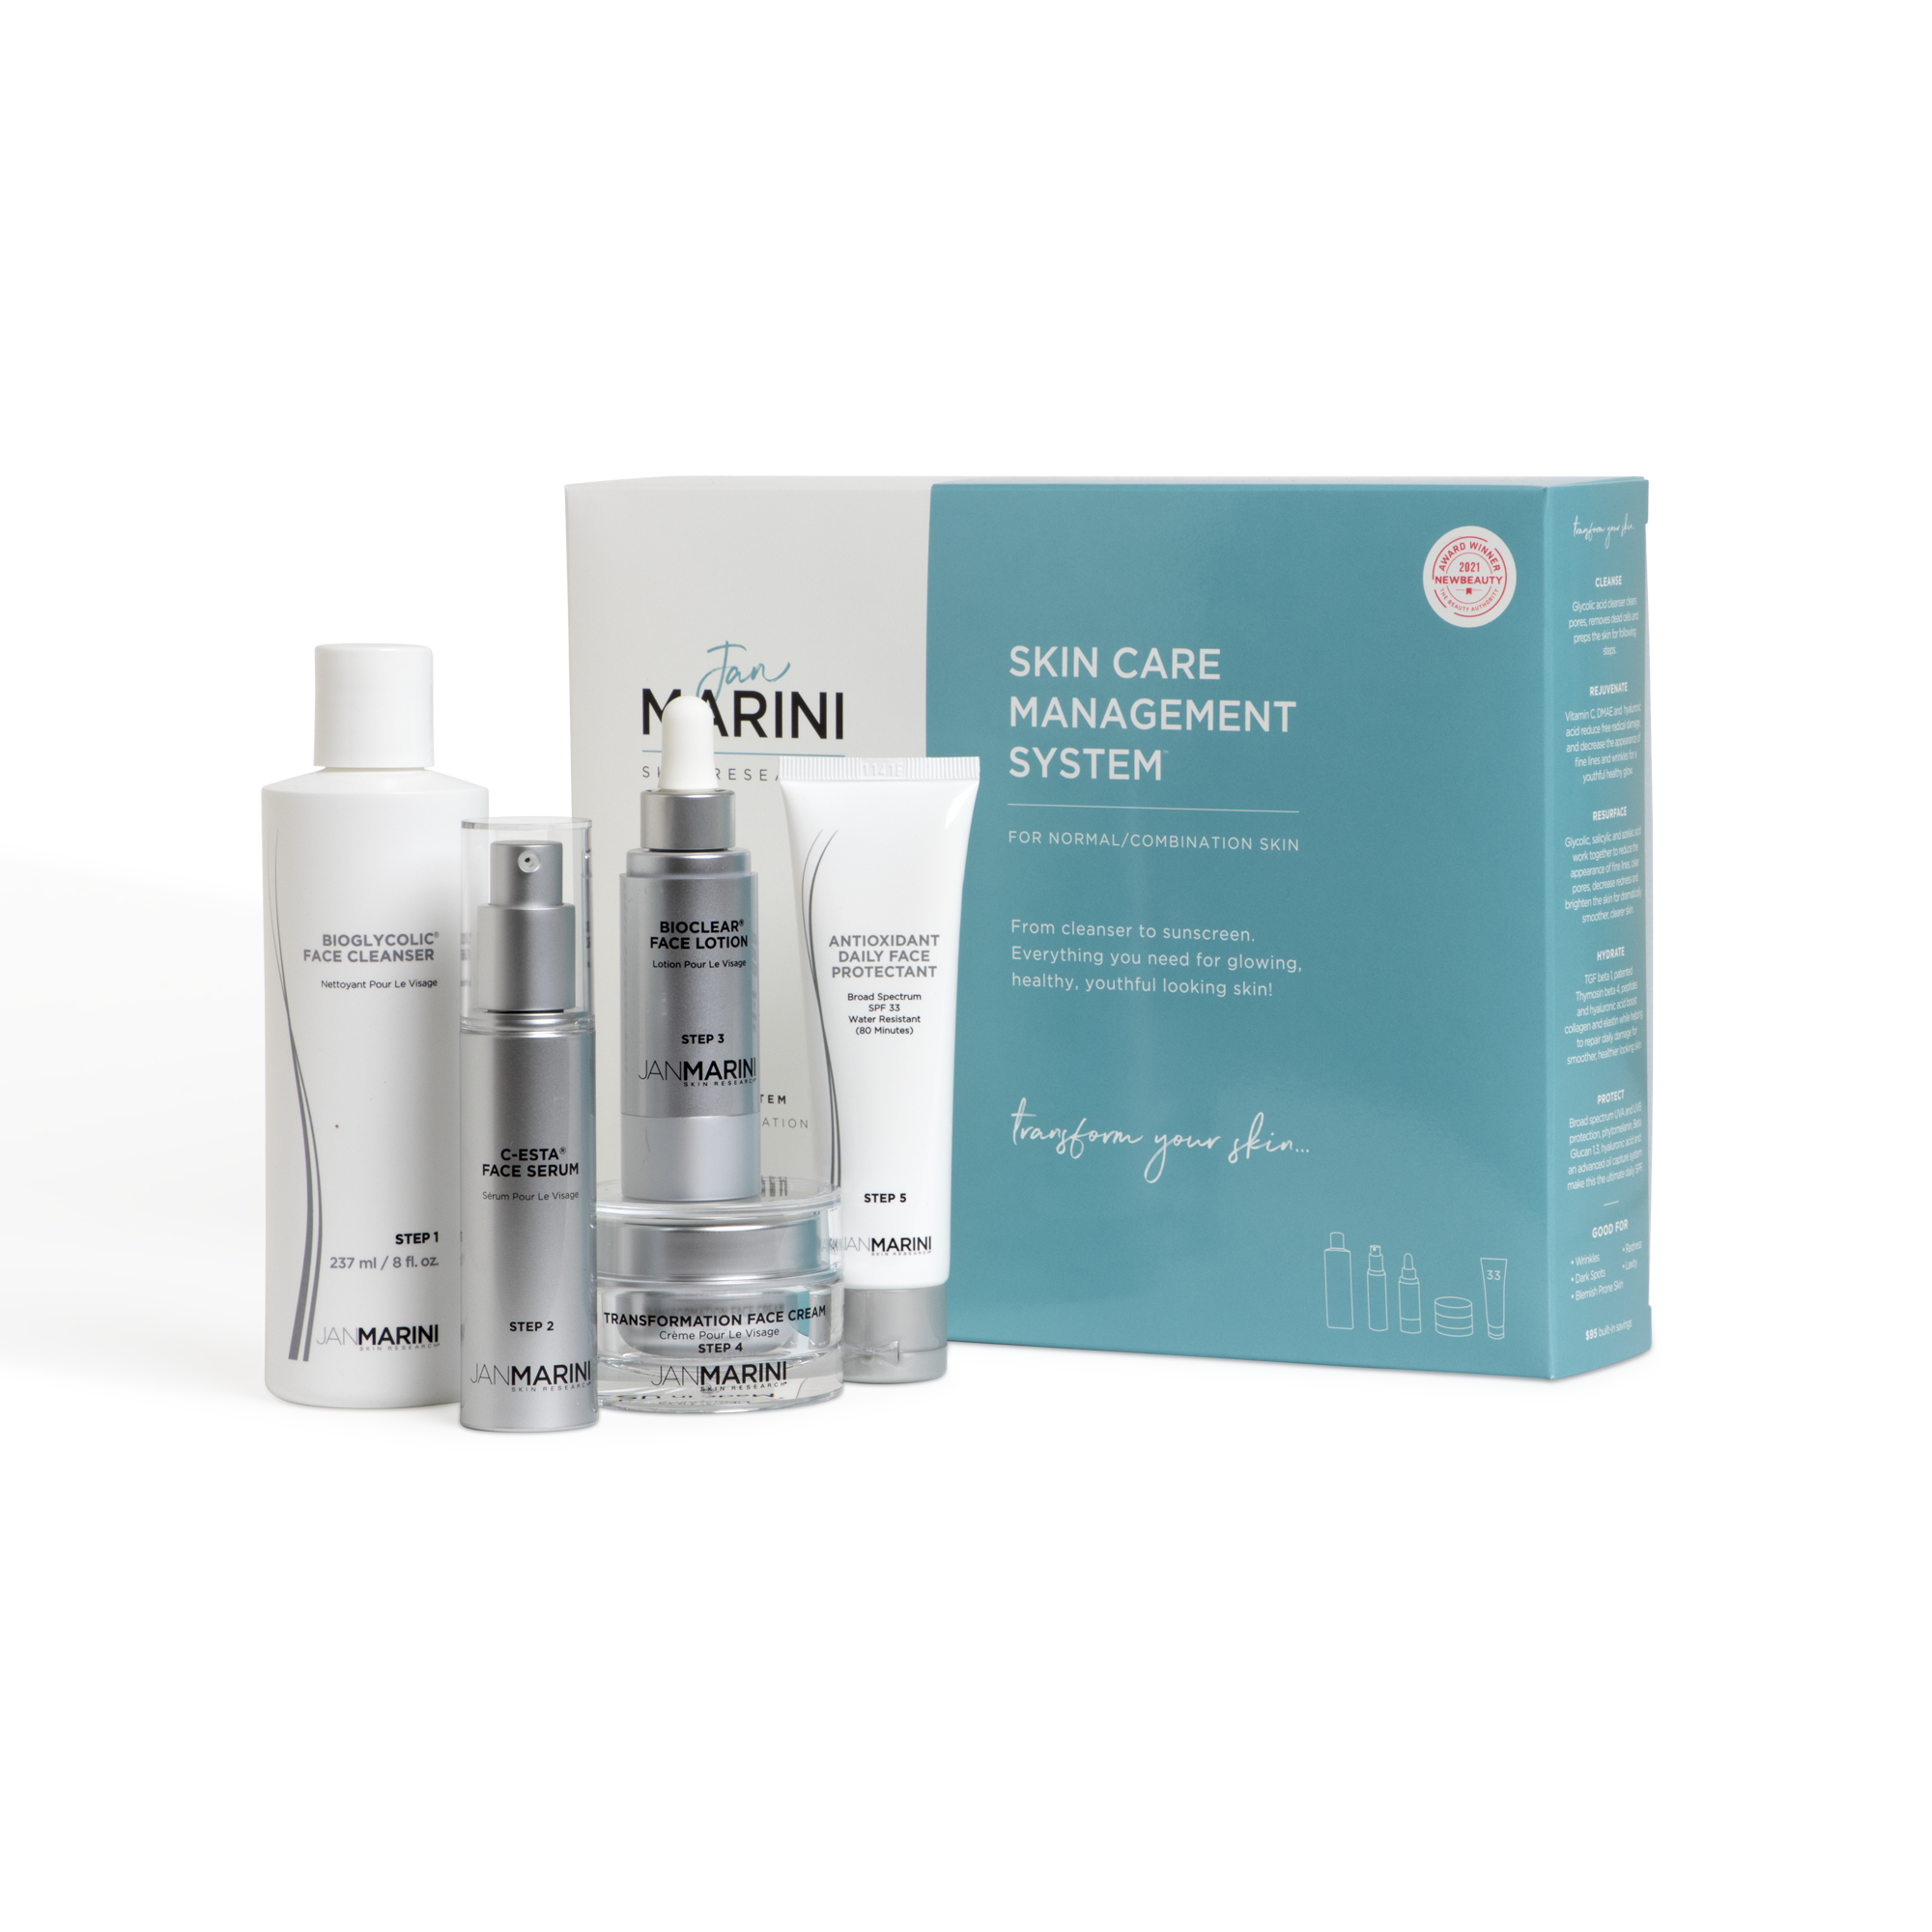 Jan Marini A Skin Care Management System - Normal Combo w/ DFP SPF 33